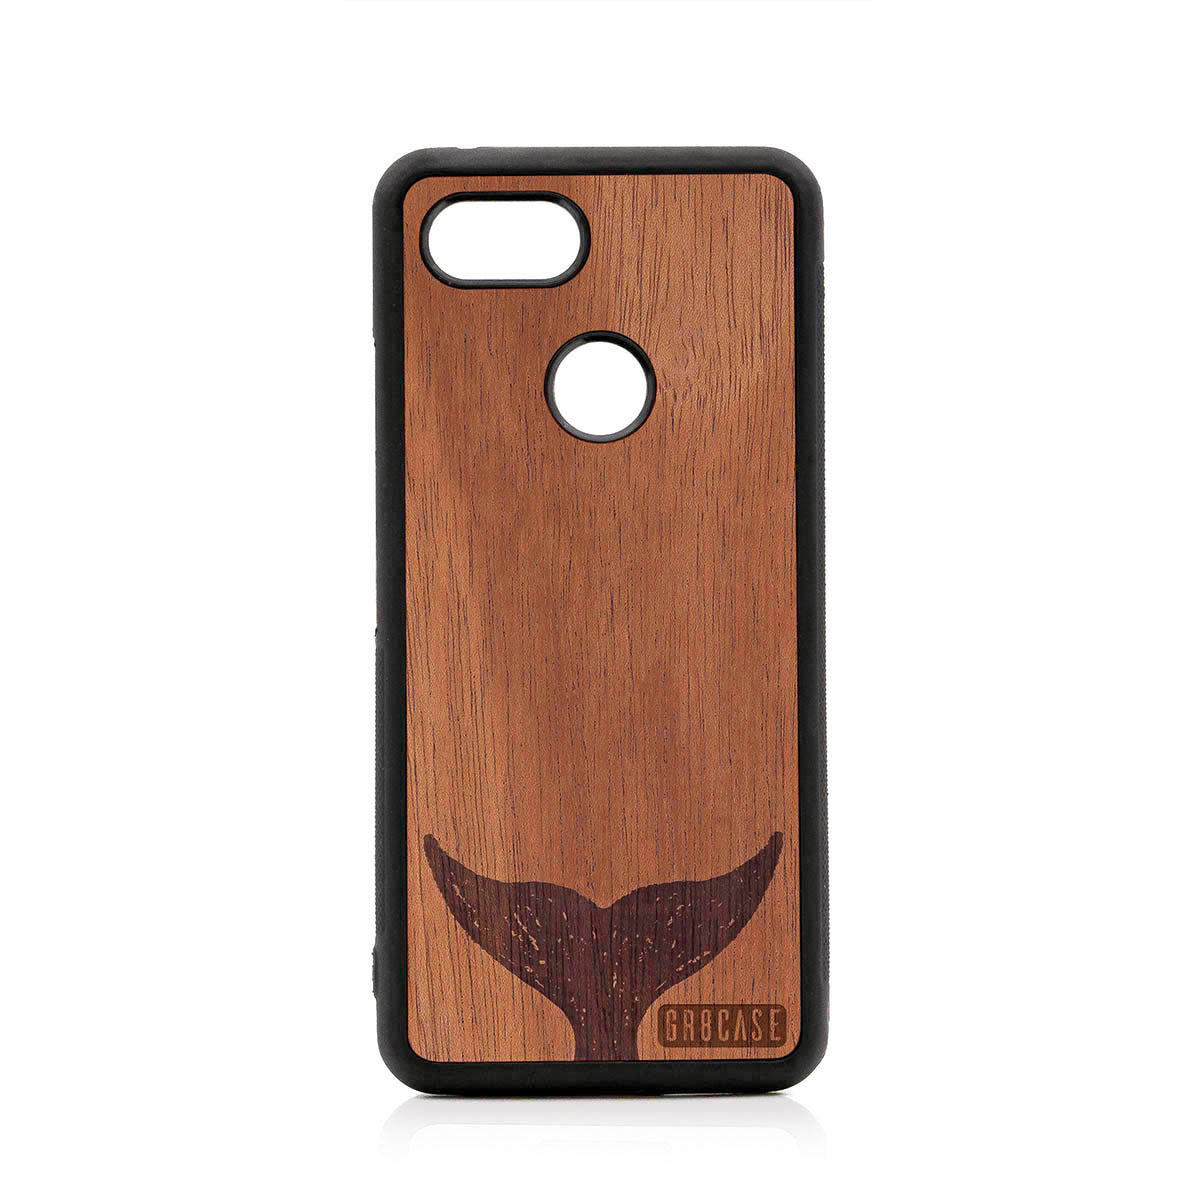 Whale Tail Design Wood Case For Google Pixel 3